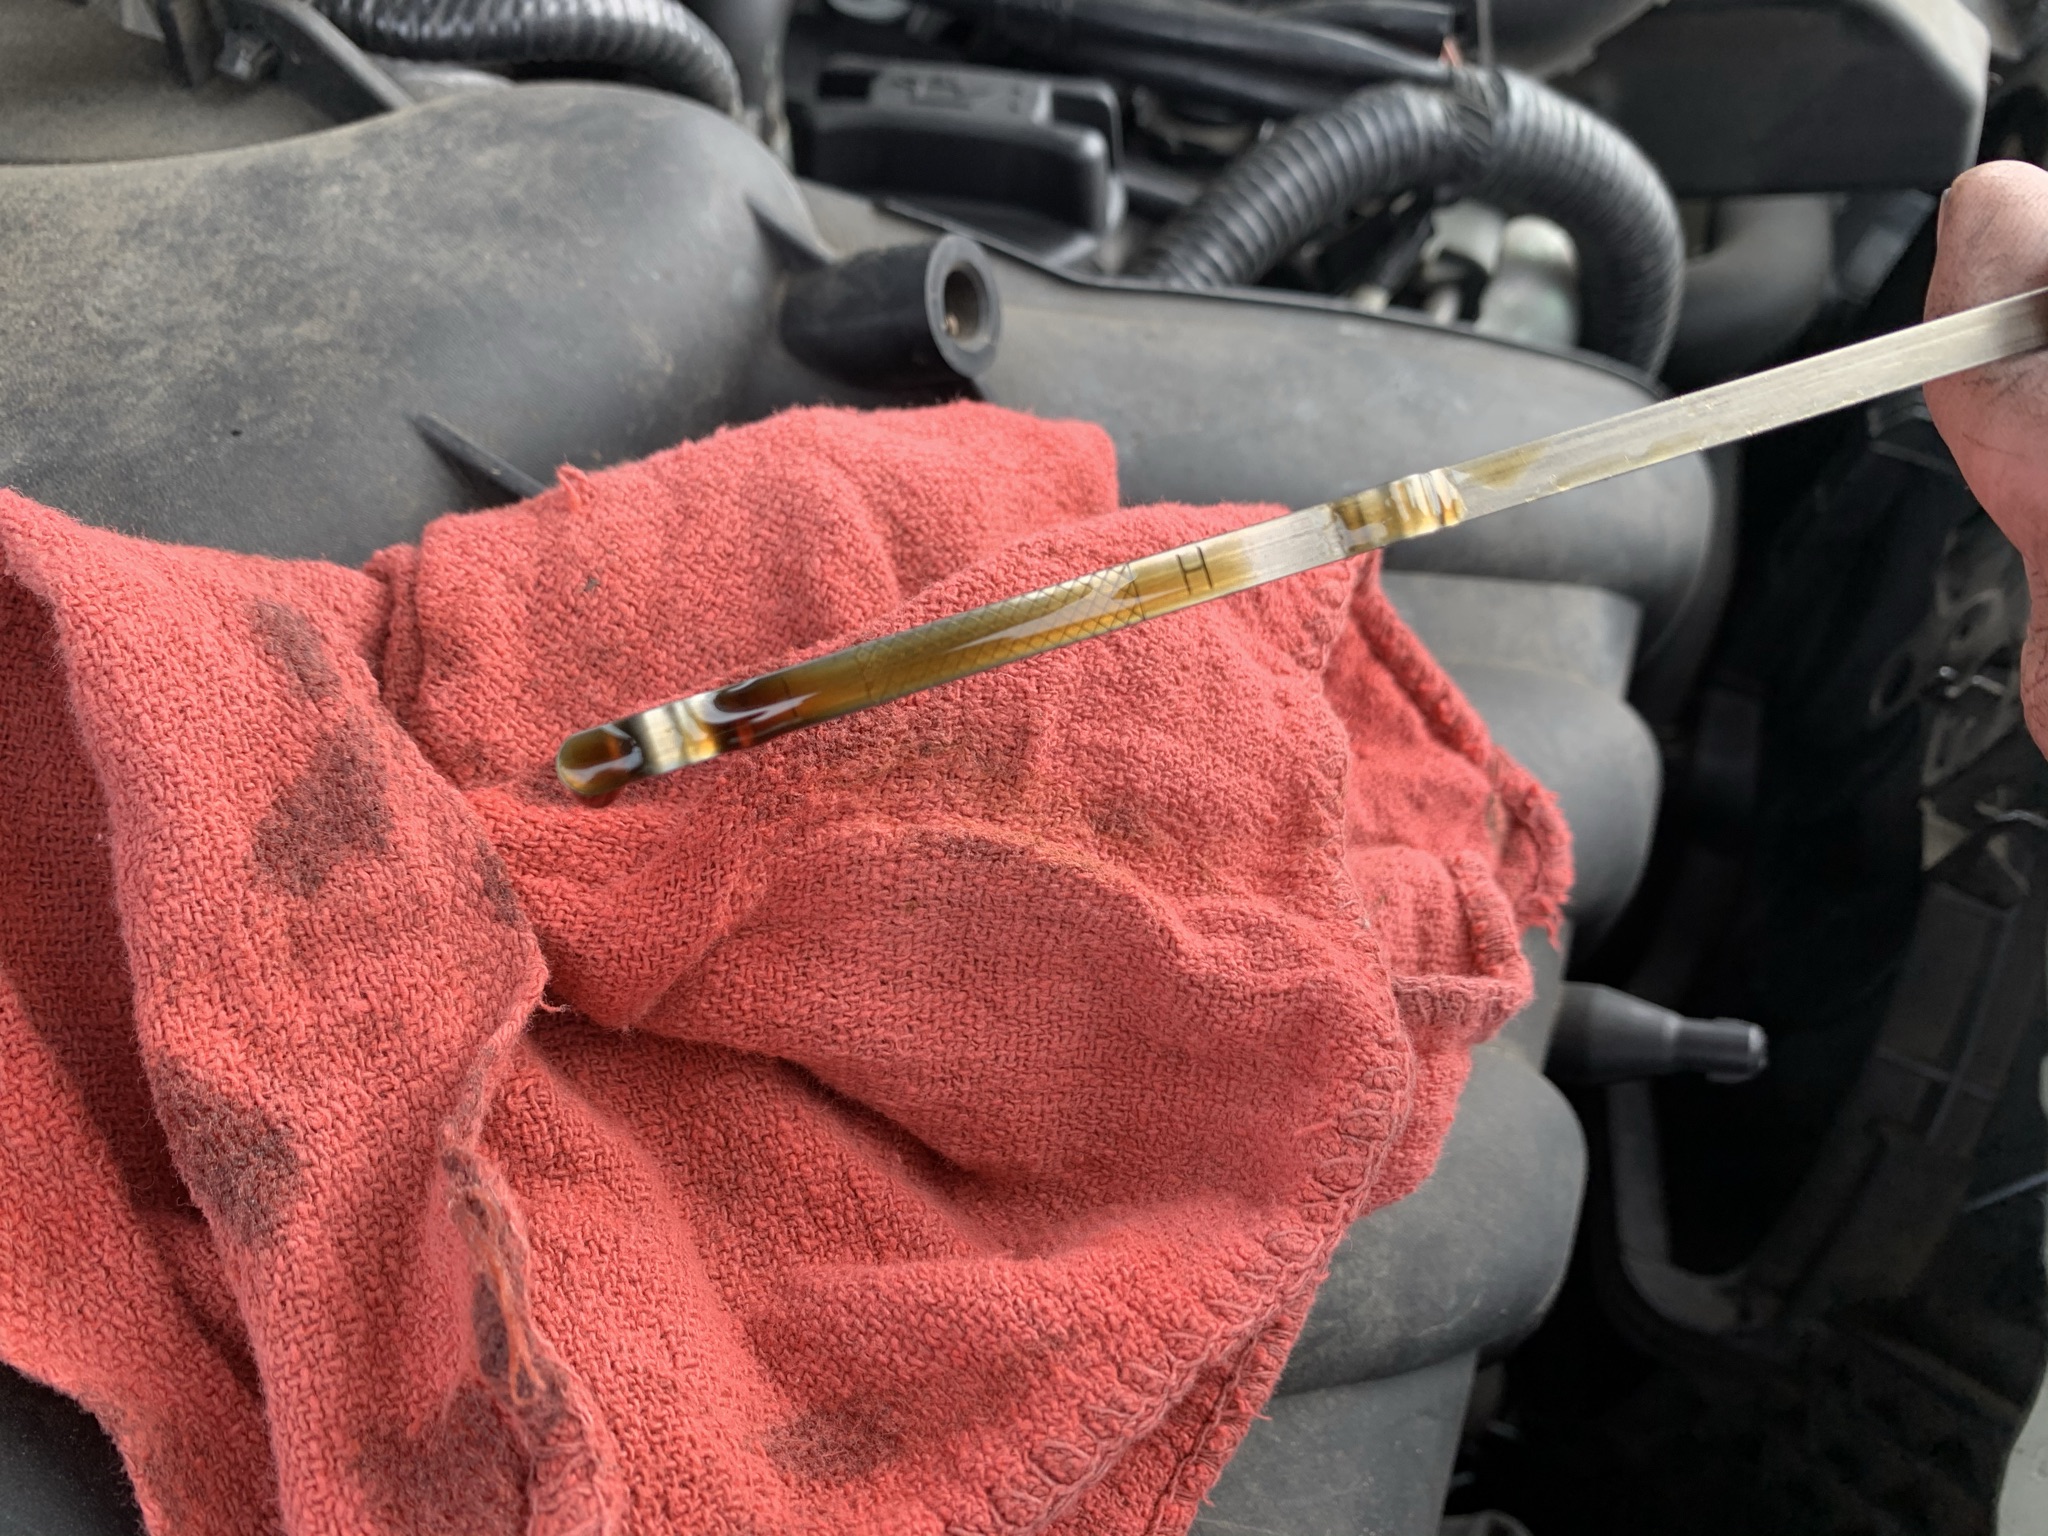 Graham Auto Repair Check My Oil Blog - Oil Level is Not Low - Graham, WA 98338